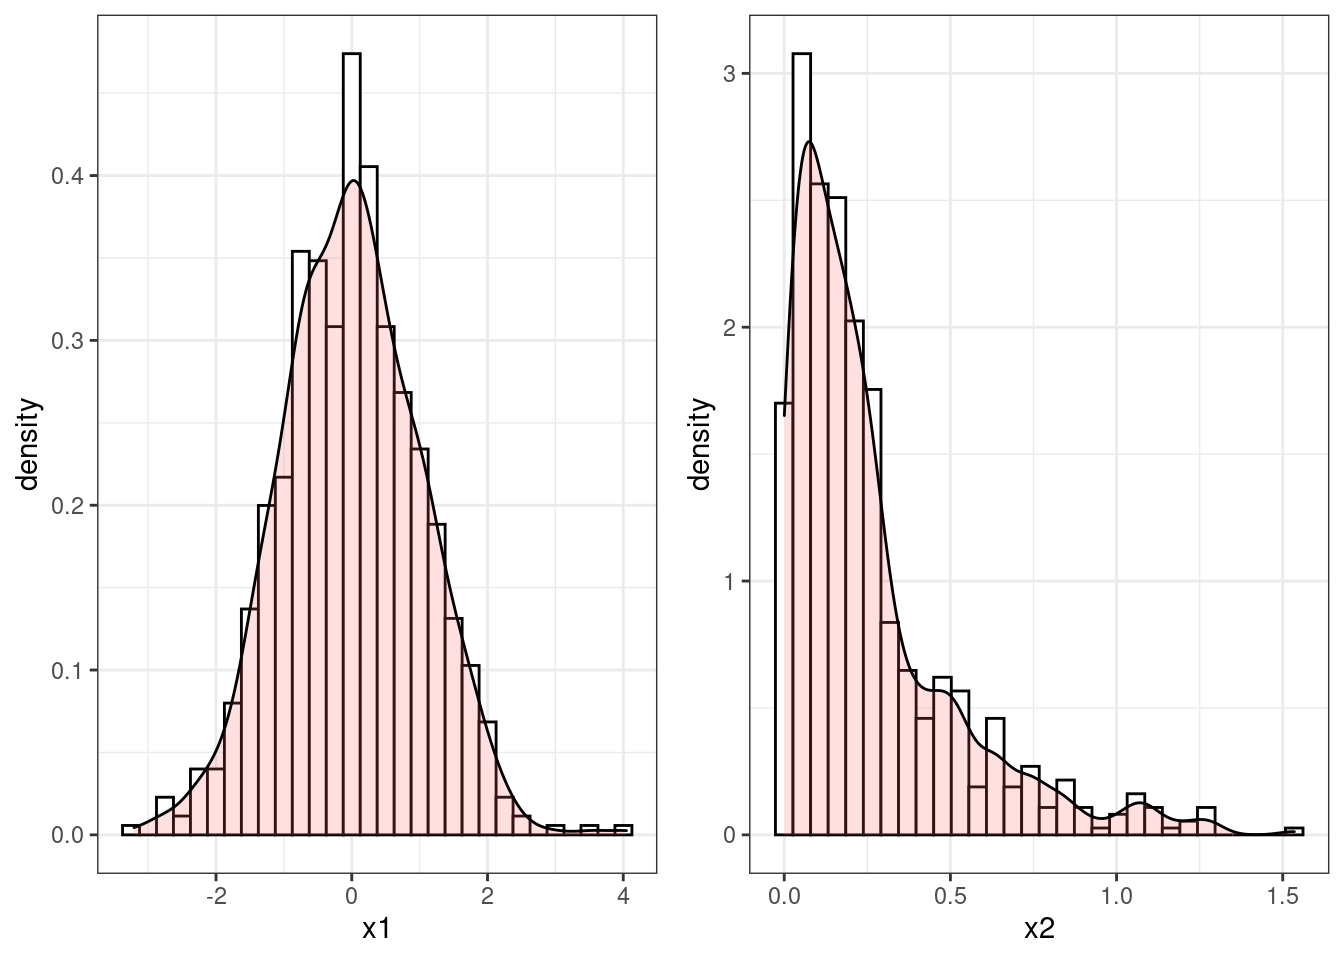 Histograms of two sequences of randomly generated numbers